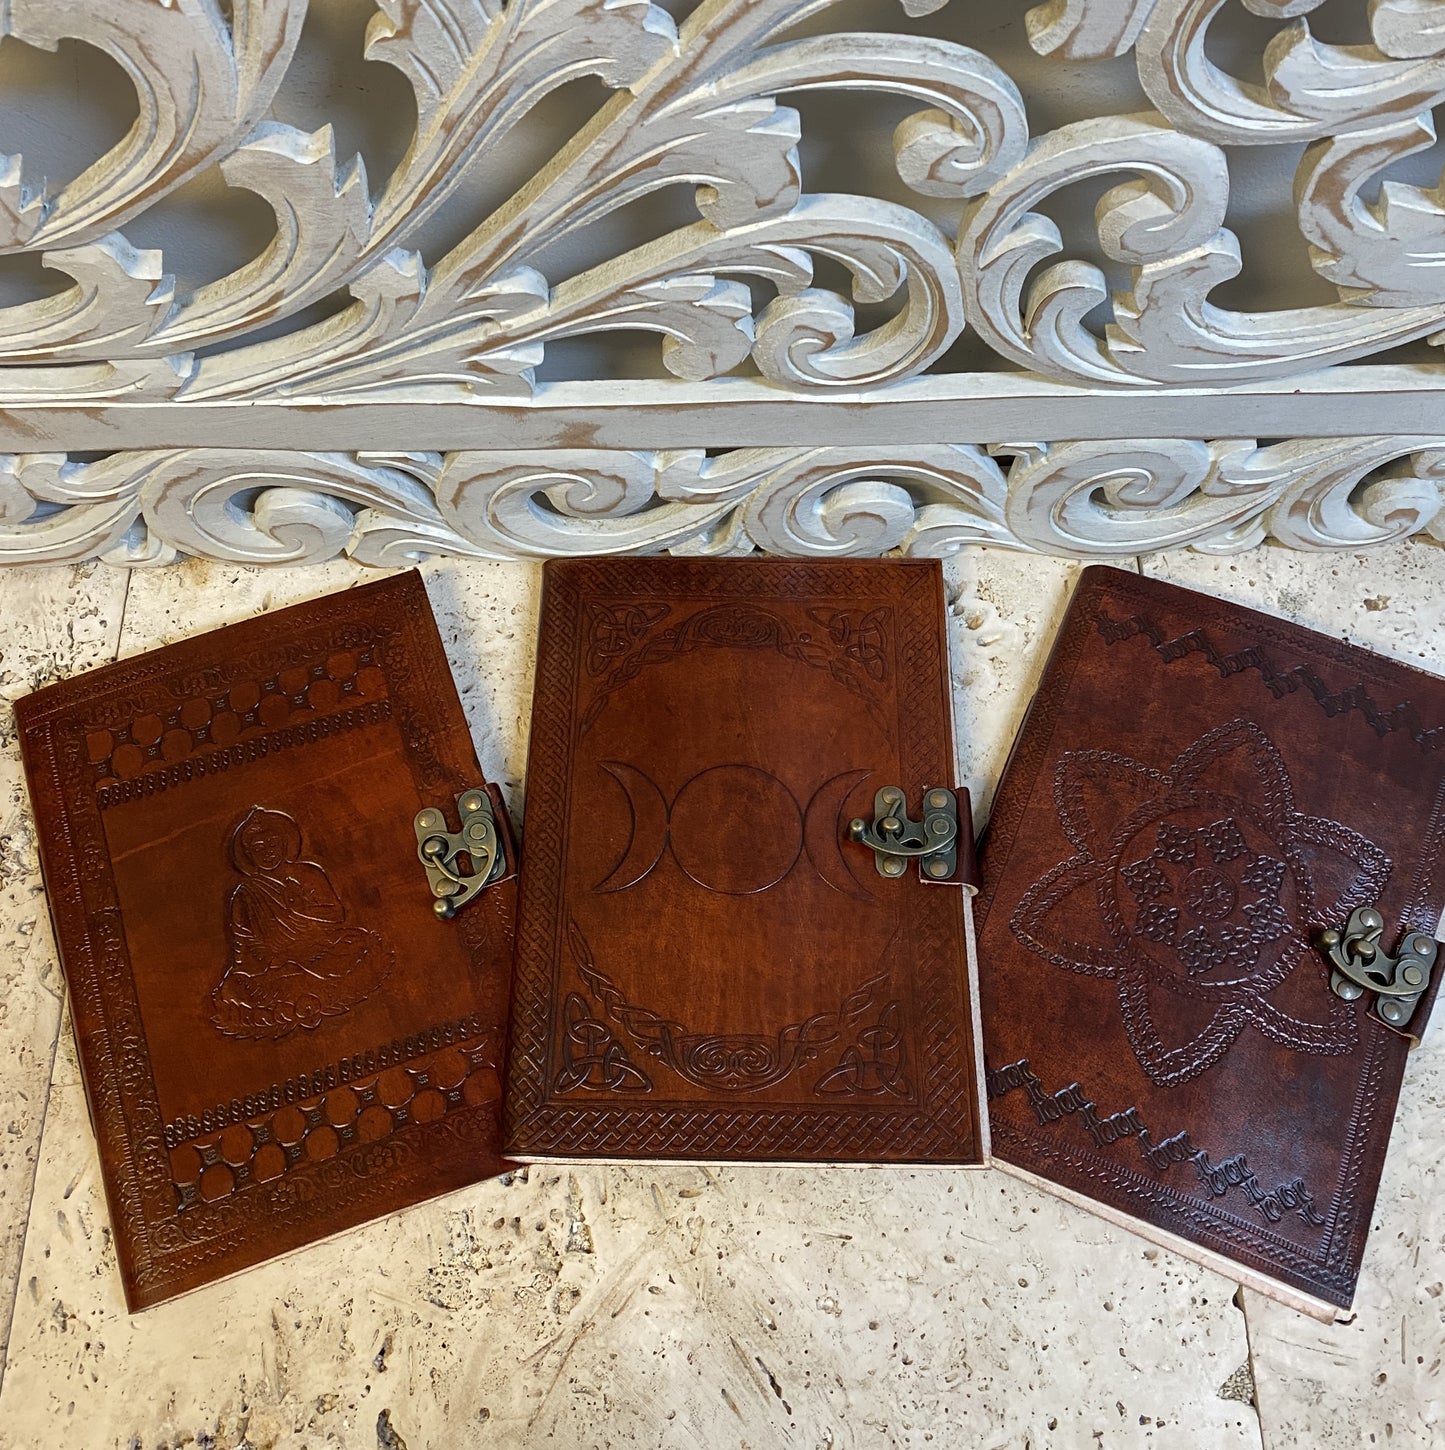 Hand Embossed Camel leather Journal with Buckle Latch - 7" x 10" x 1/2"